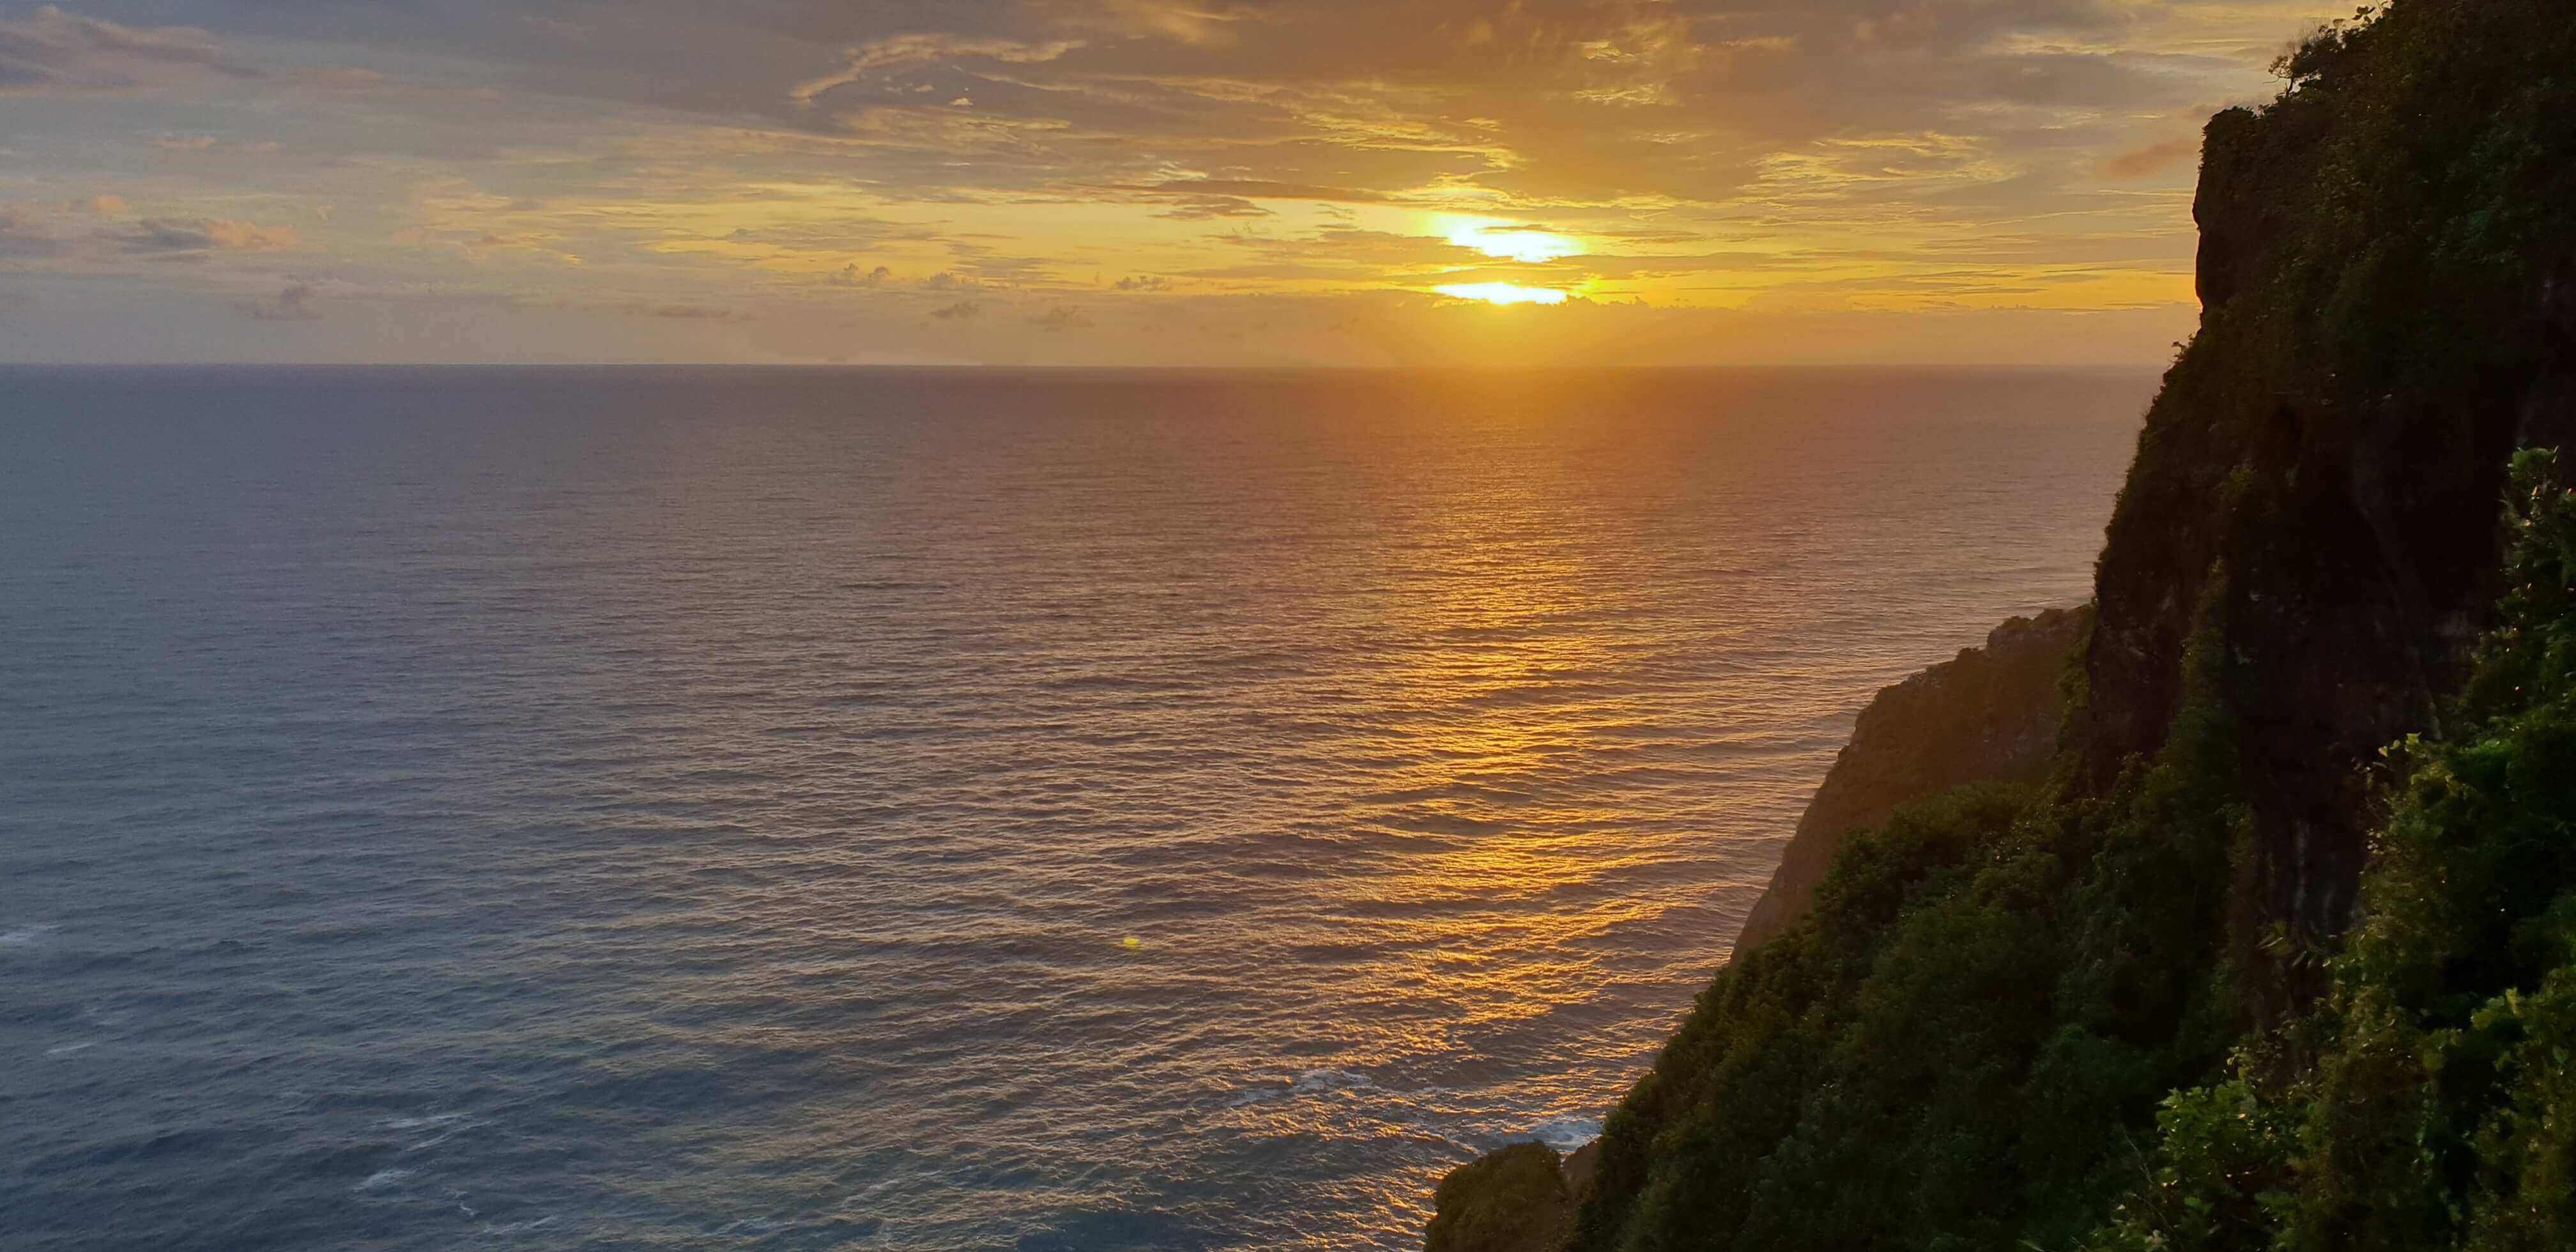 The majestic sunset as seen from Oneeighty° clifftop club